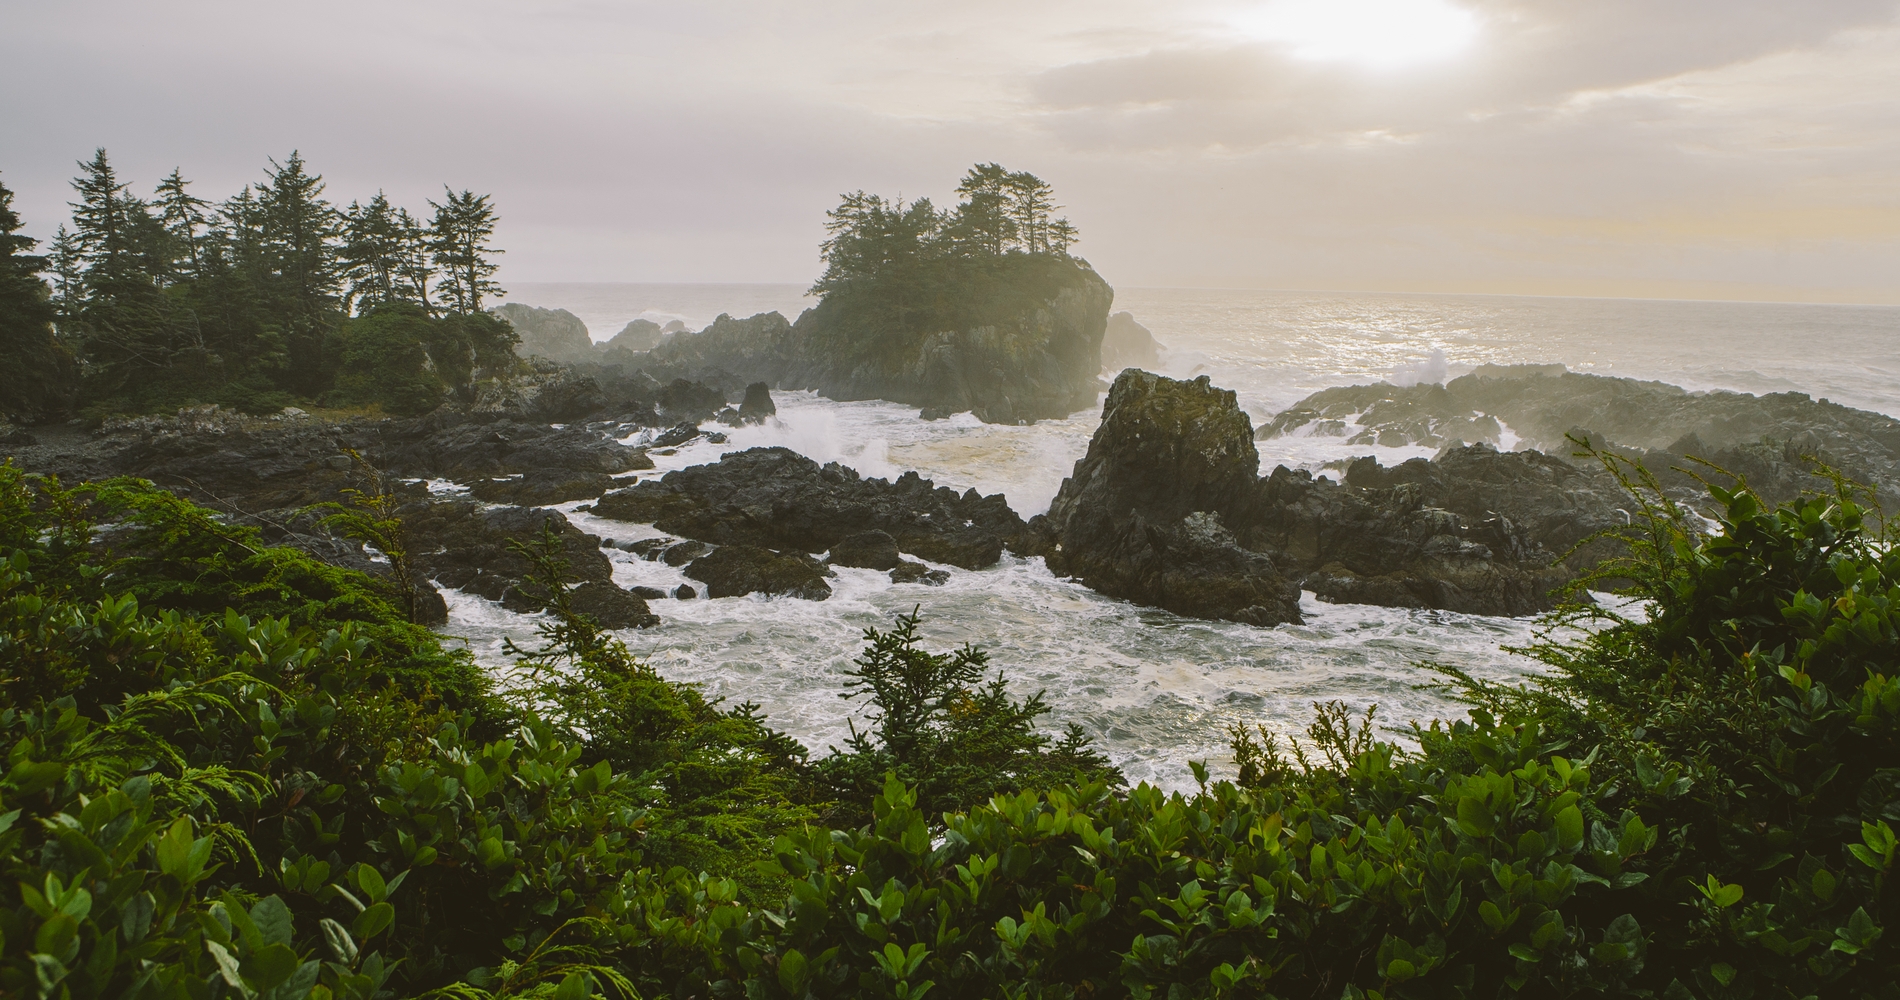 Tourism Vancouver Island/Ben Giesbrecht Description: Sunrise at Wild Pacific Trail, the Coast of Vancouver Island in Ucluelet